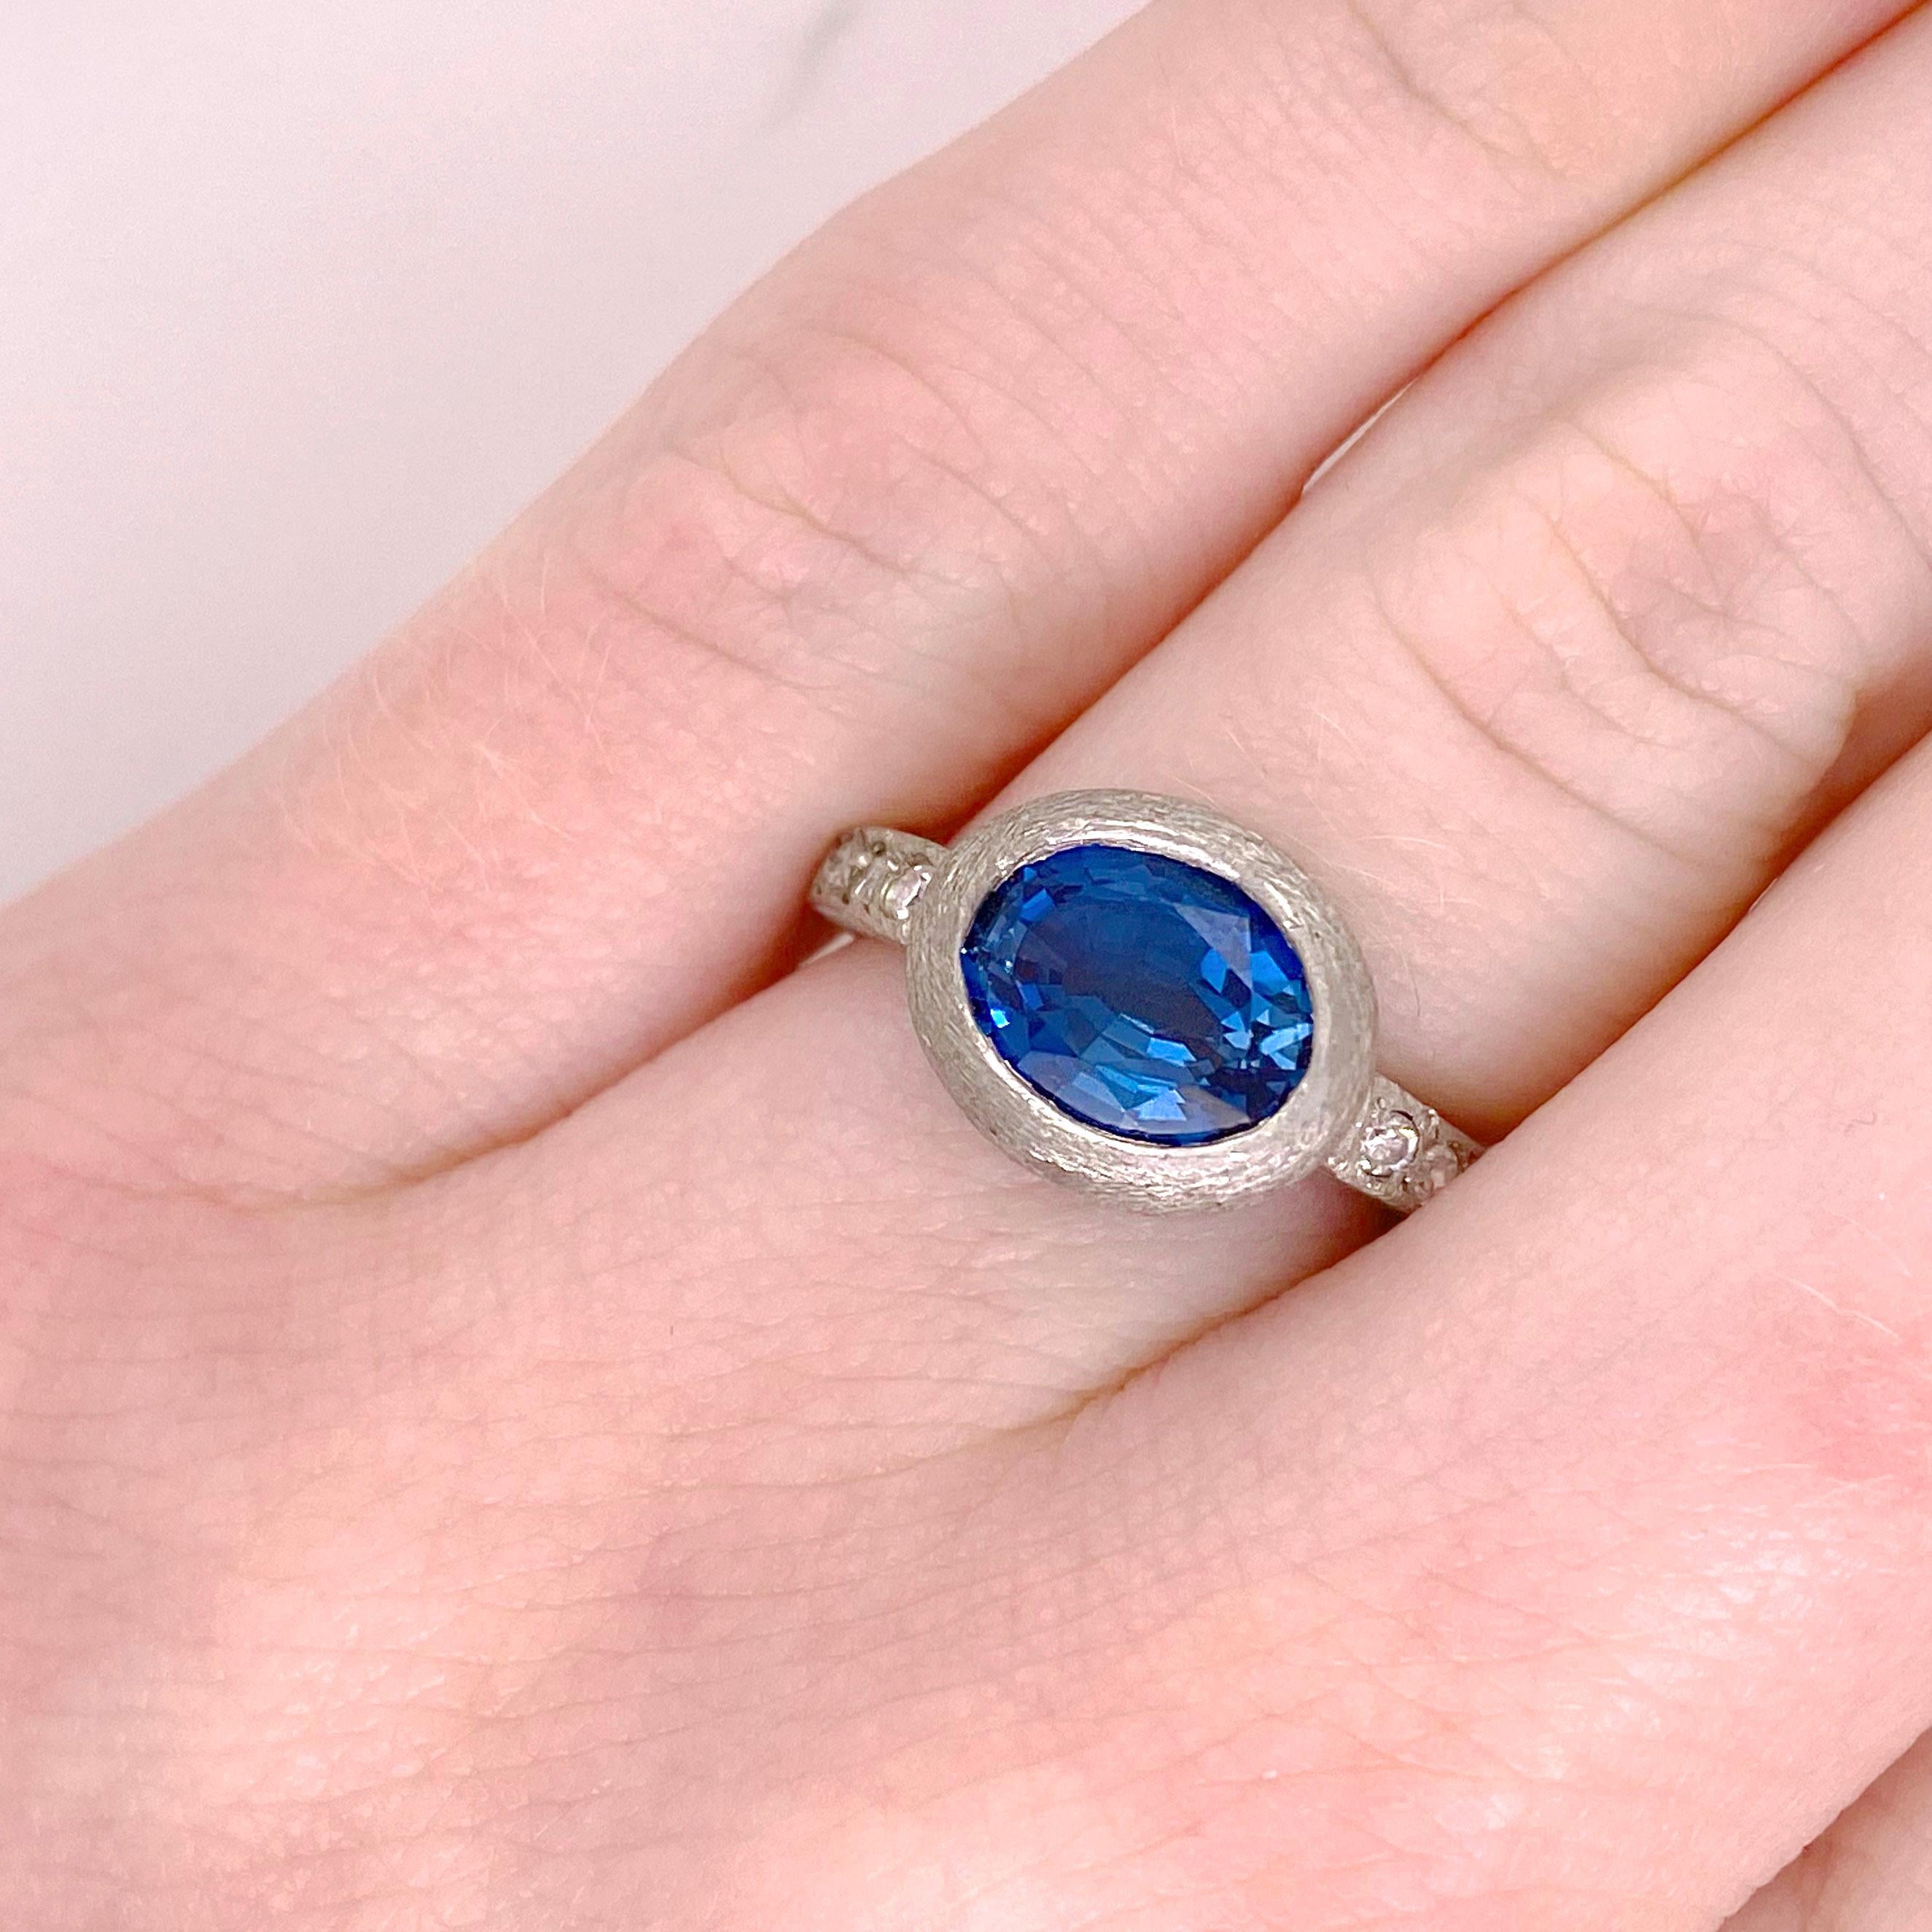 Notice the originality of this one-of-a-kind ring. The bezel and band are all hand fabricated from 14 karat white gold. The bezel was created to fit the 3.17 carats royal blue topaz (the most desirable color). The rock finish was created to enhance